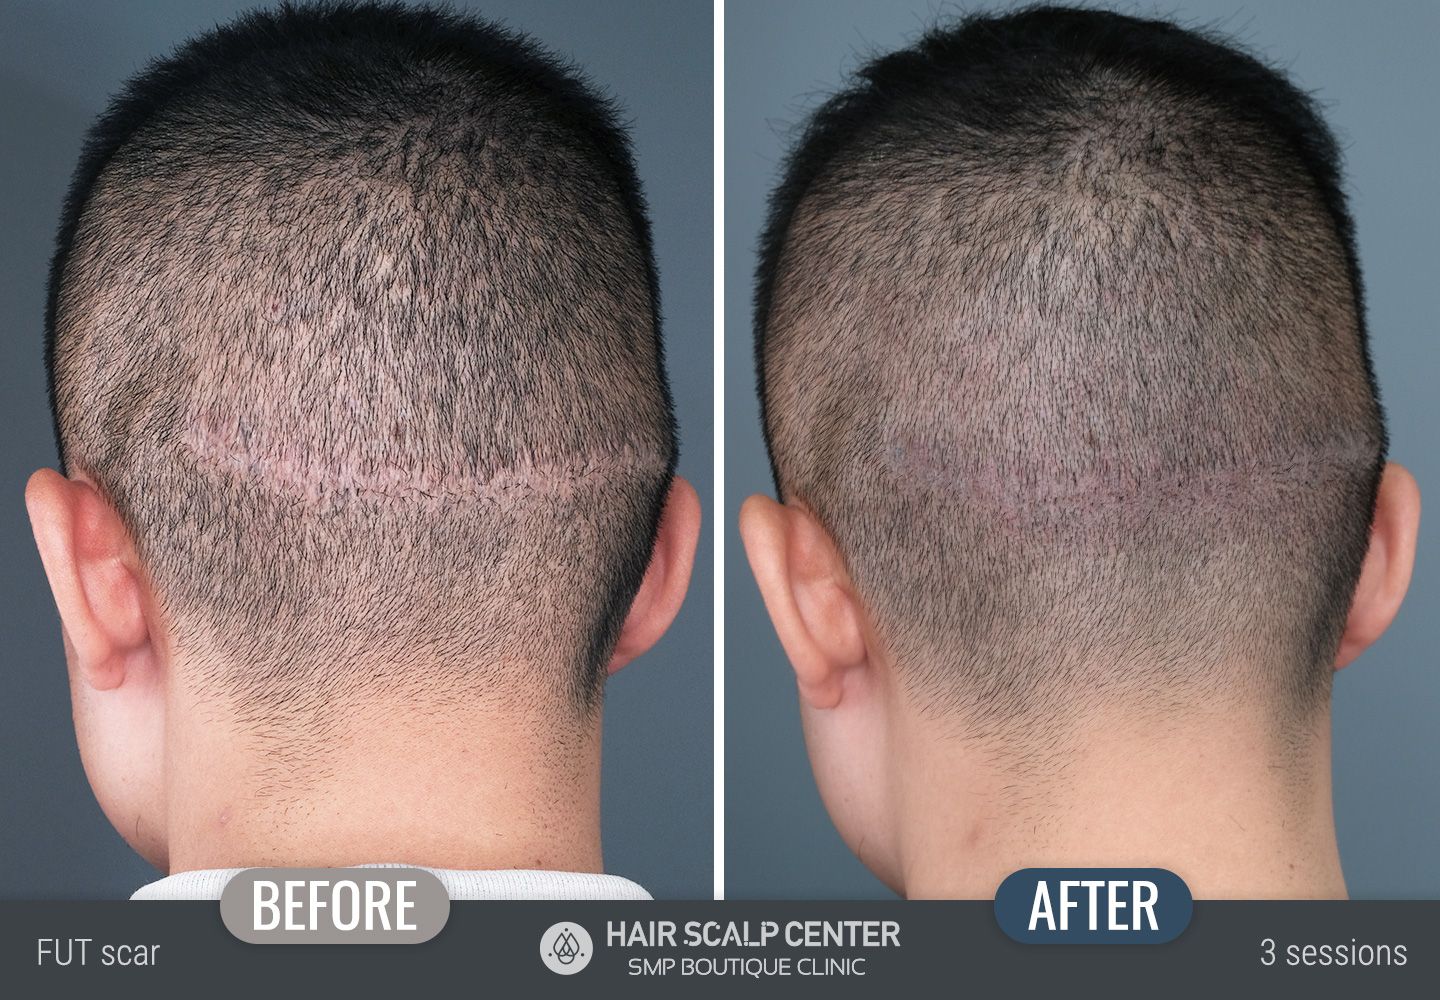 Cover surgical scars from hair transplants with SMP | Hair Scalp Center |  Bangkok, Thailand